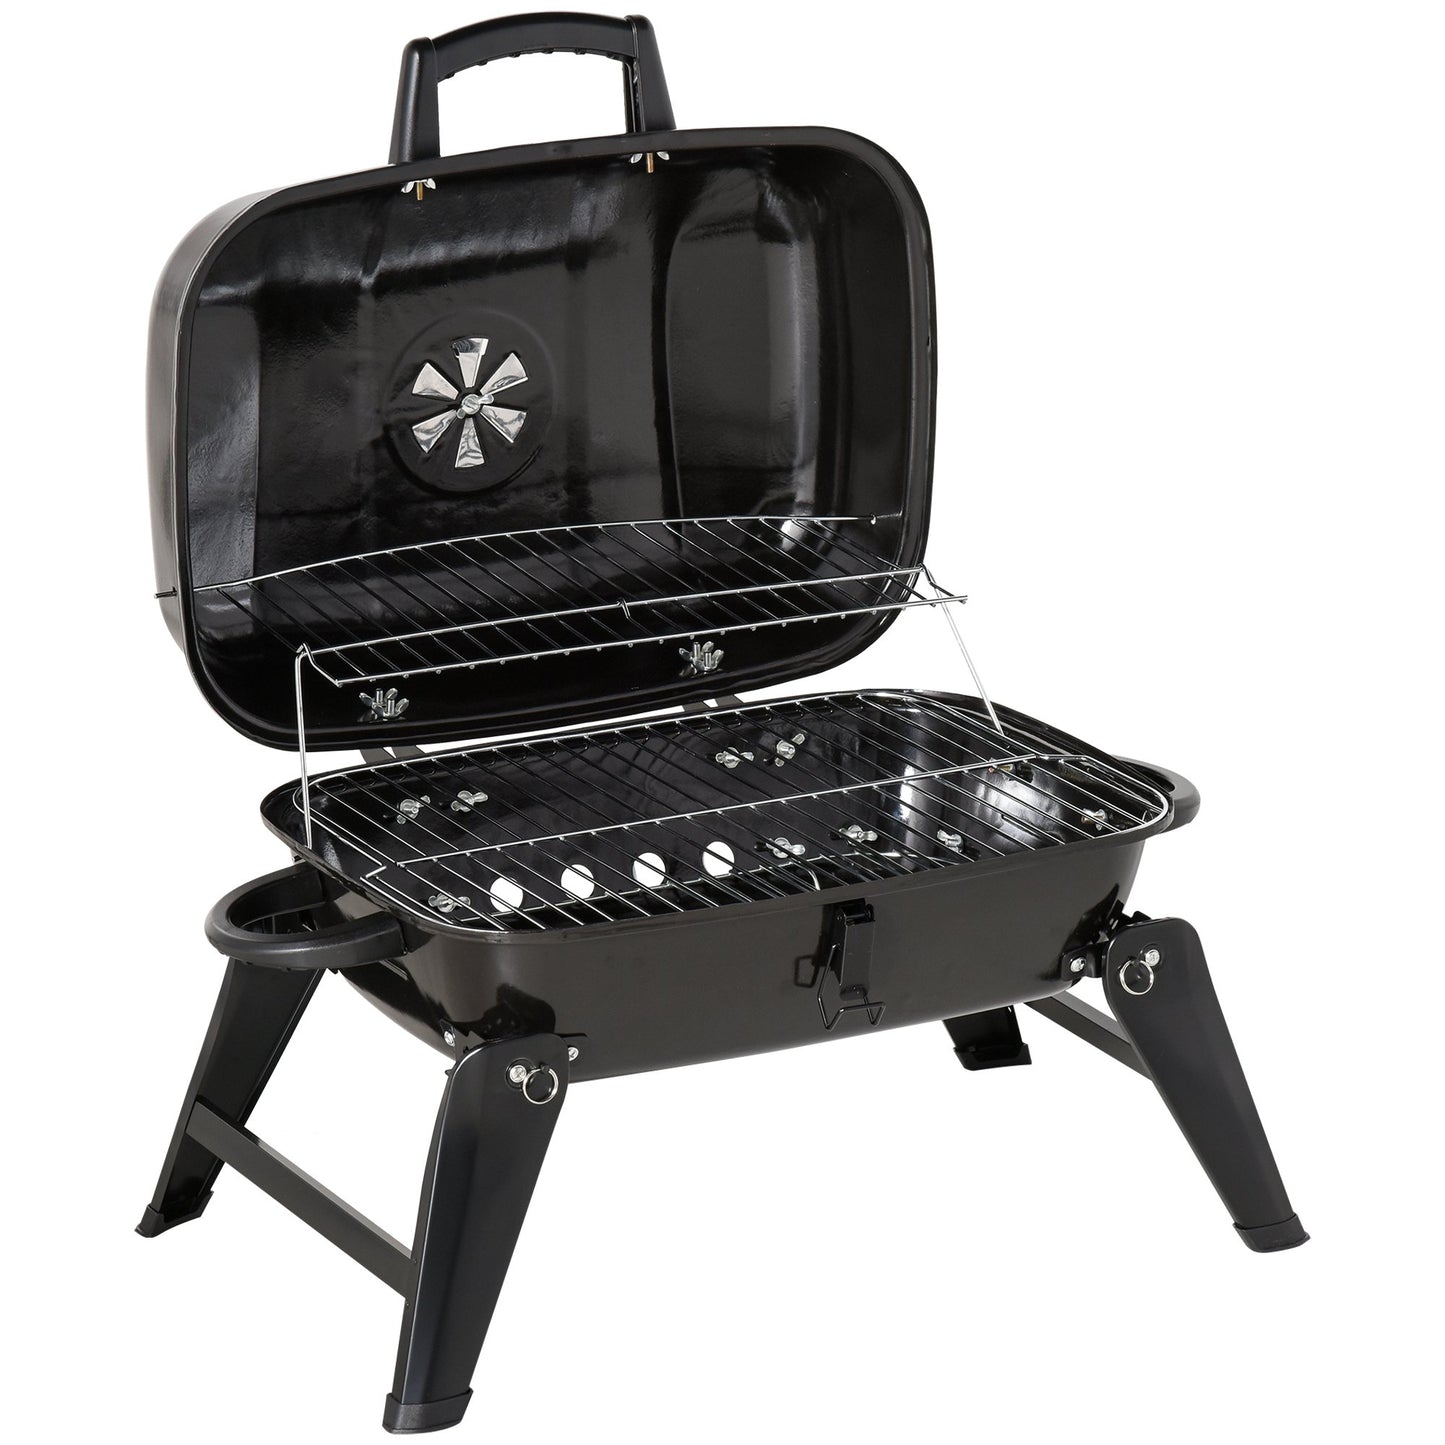 Outsunny Charcoal Grill, Iron Porcelain Enameled Lid, 59Lx43Wx36H cm-Black